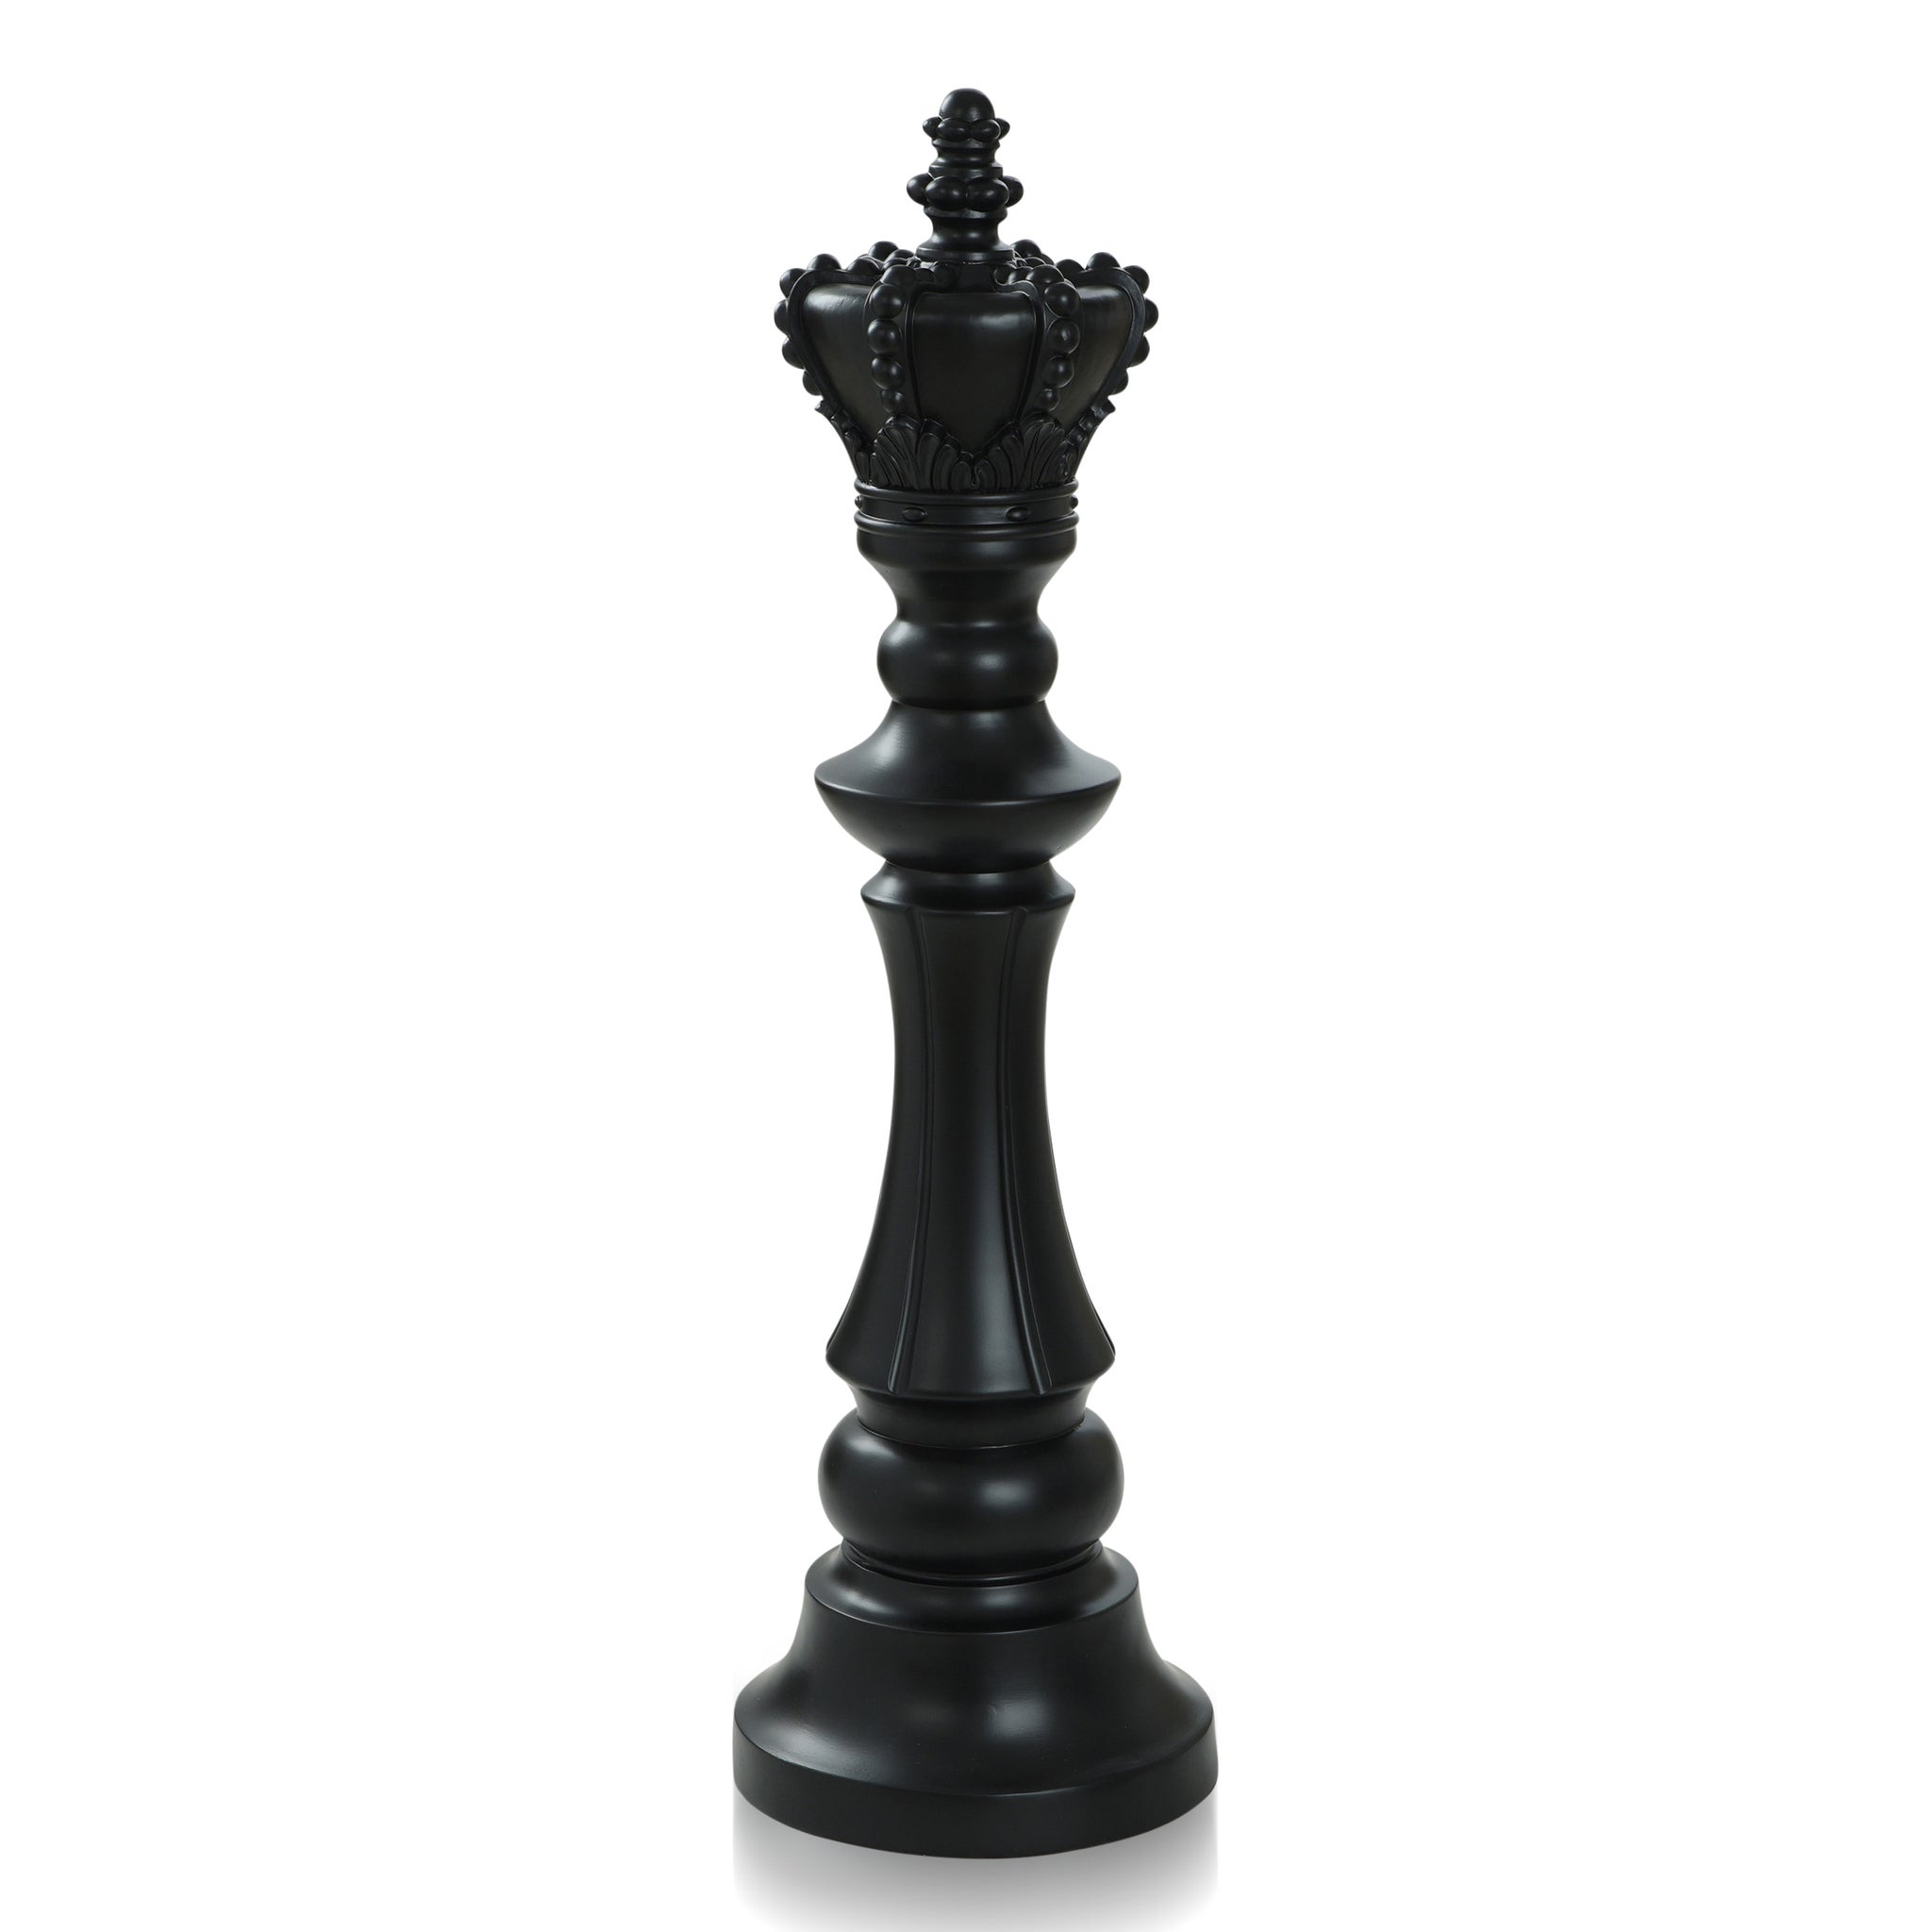 KING CHESS PIECE- BLACK, Matte Black Finish on Resin - accents